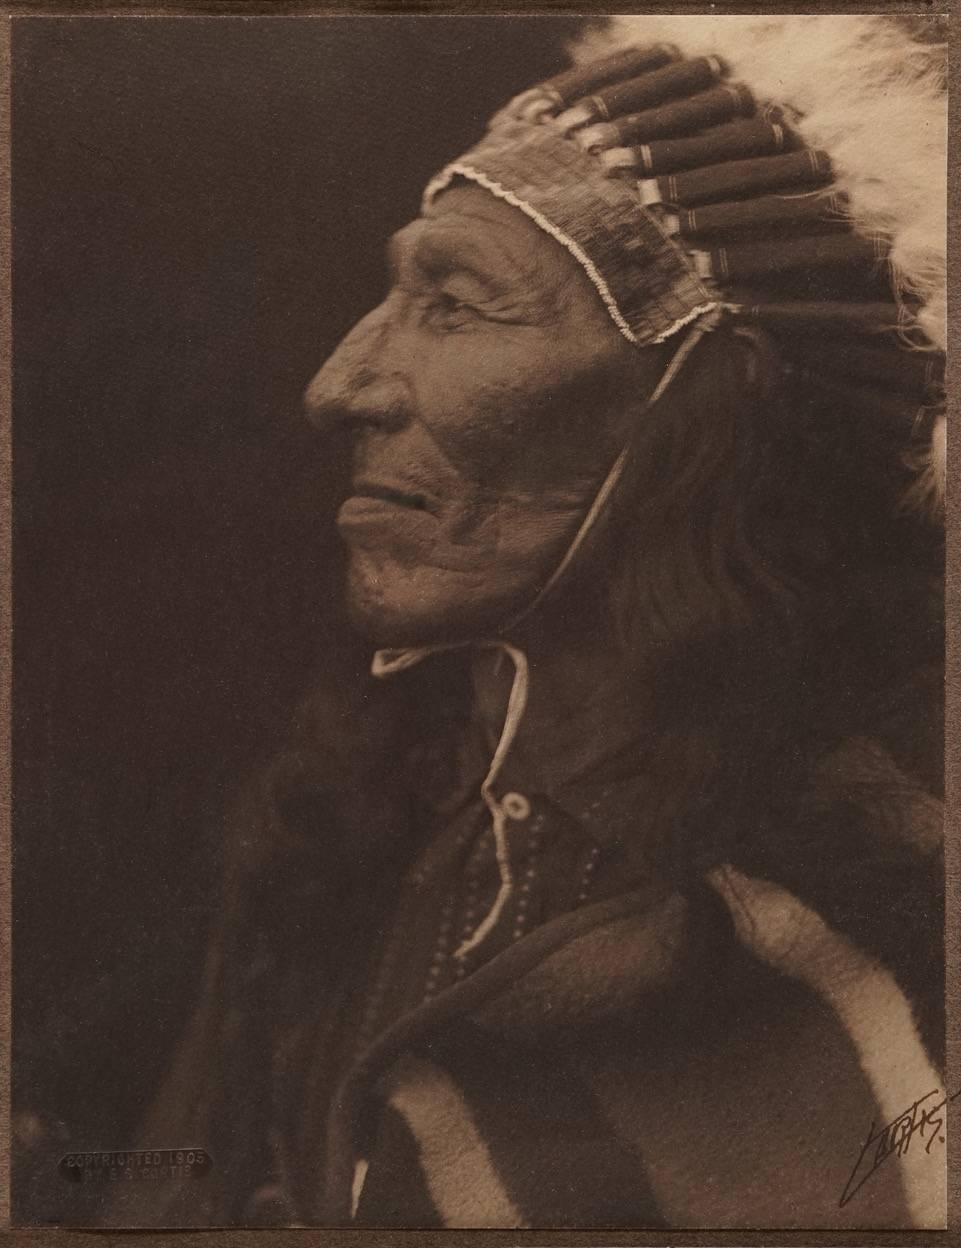 American Indian - Photograph by Edward Curtis